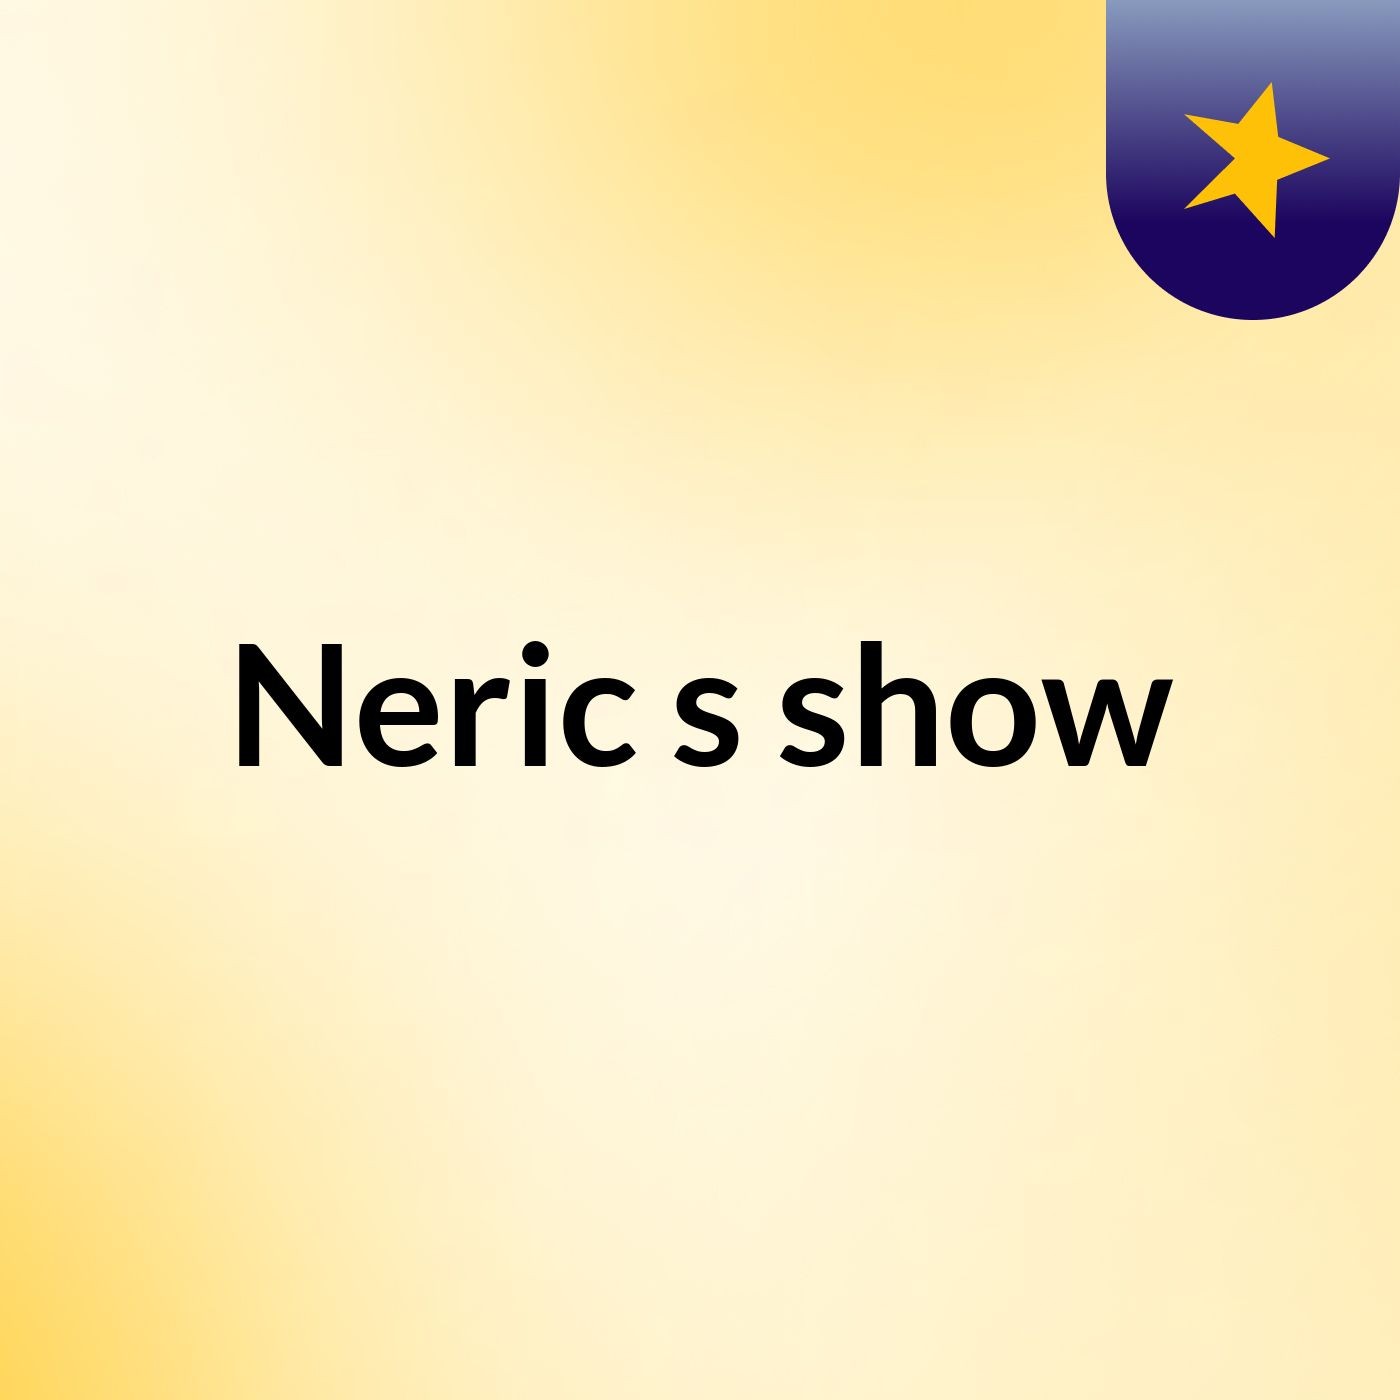 Neric's show